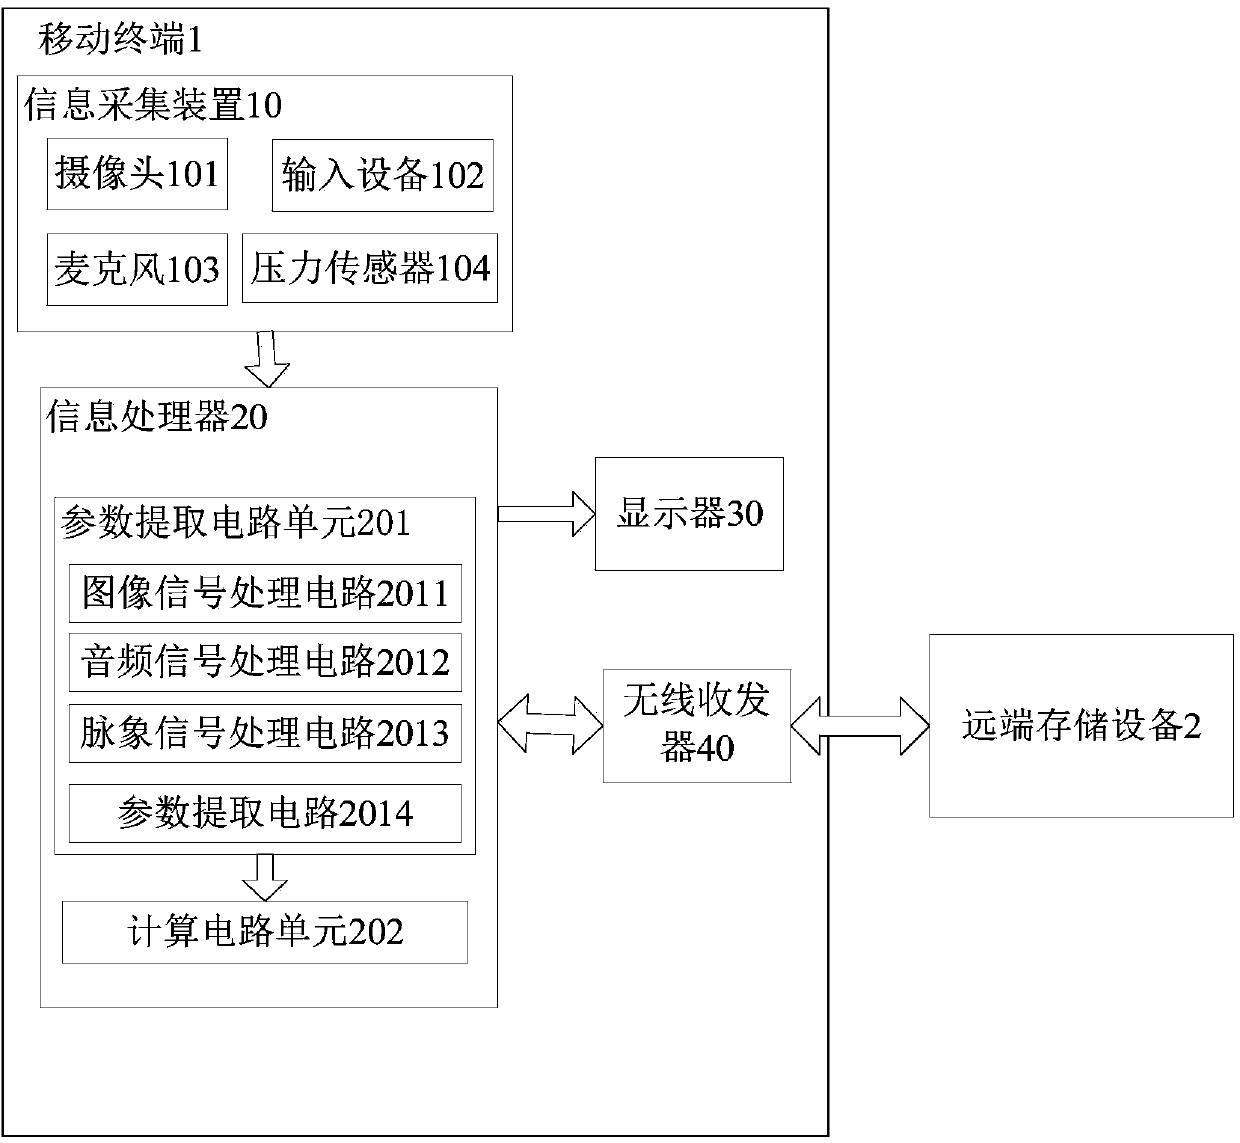 System and method for health status monitoring based on traditional Chinese medicine diagnosis information